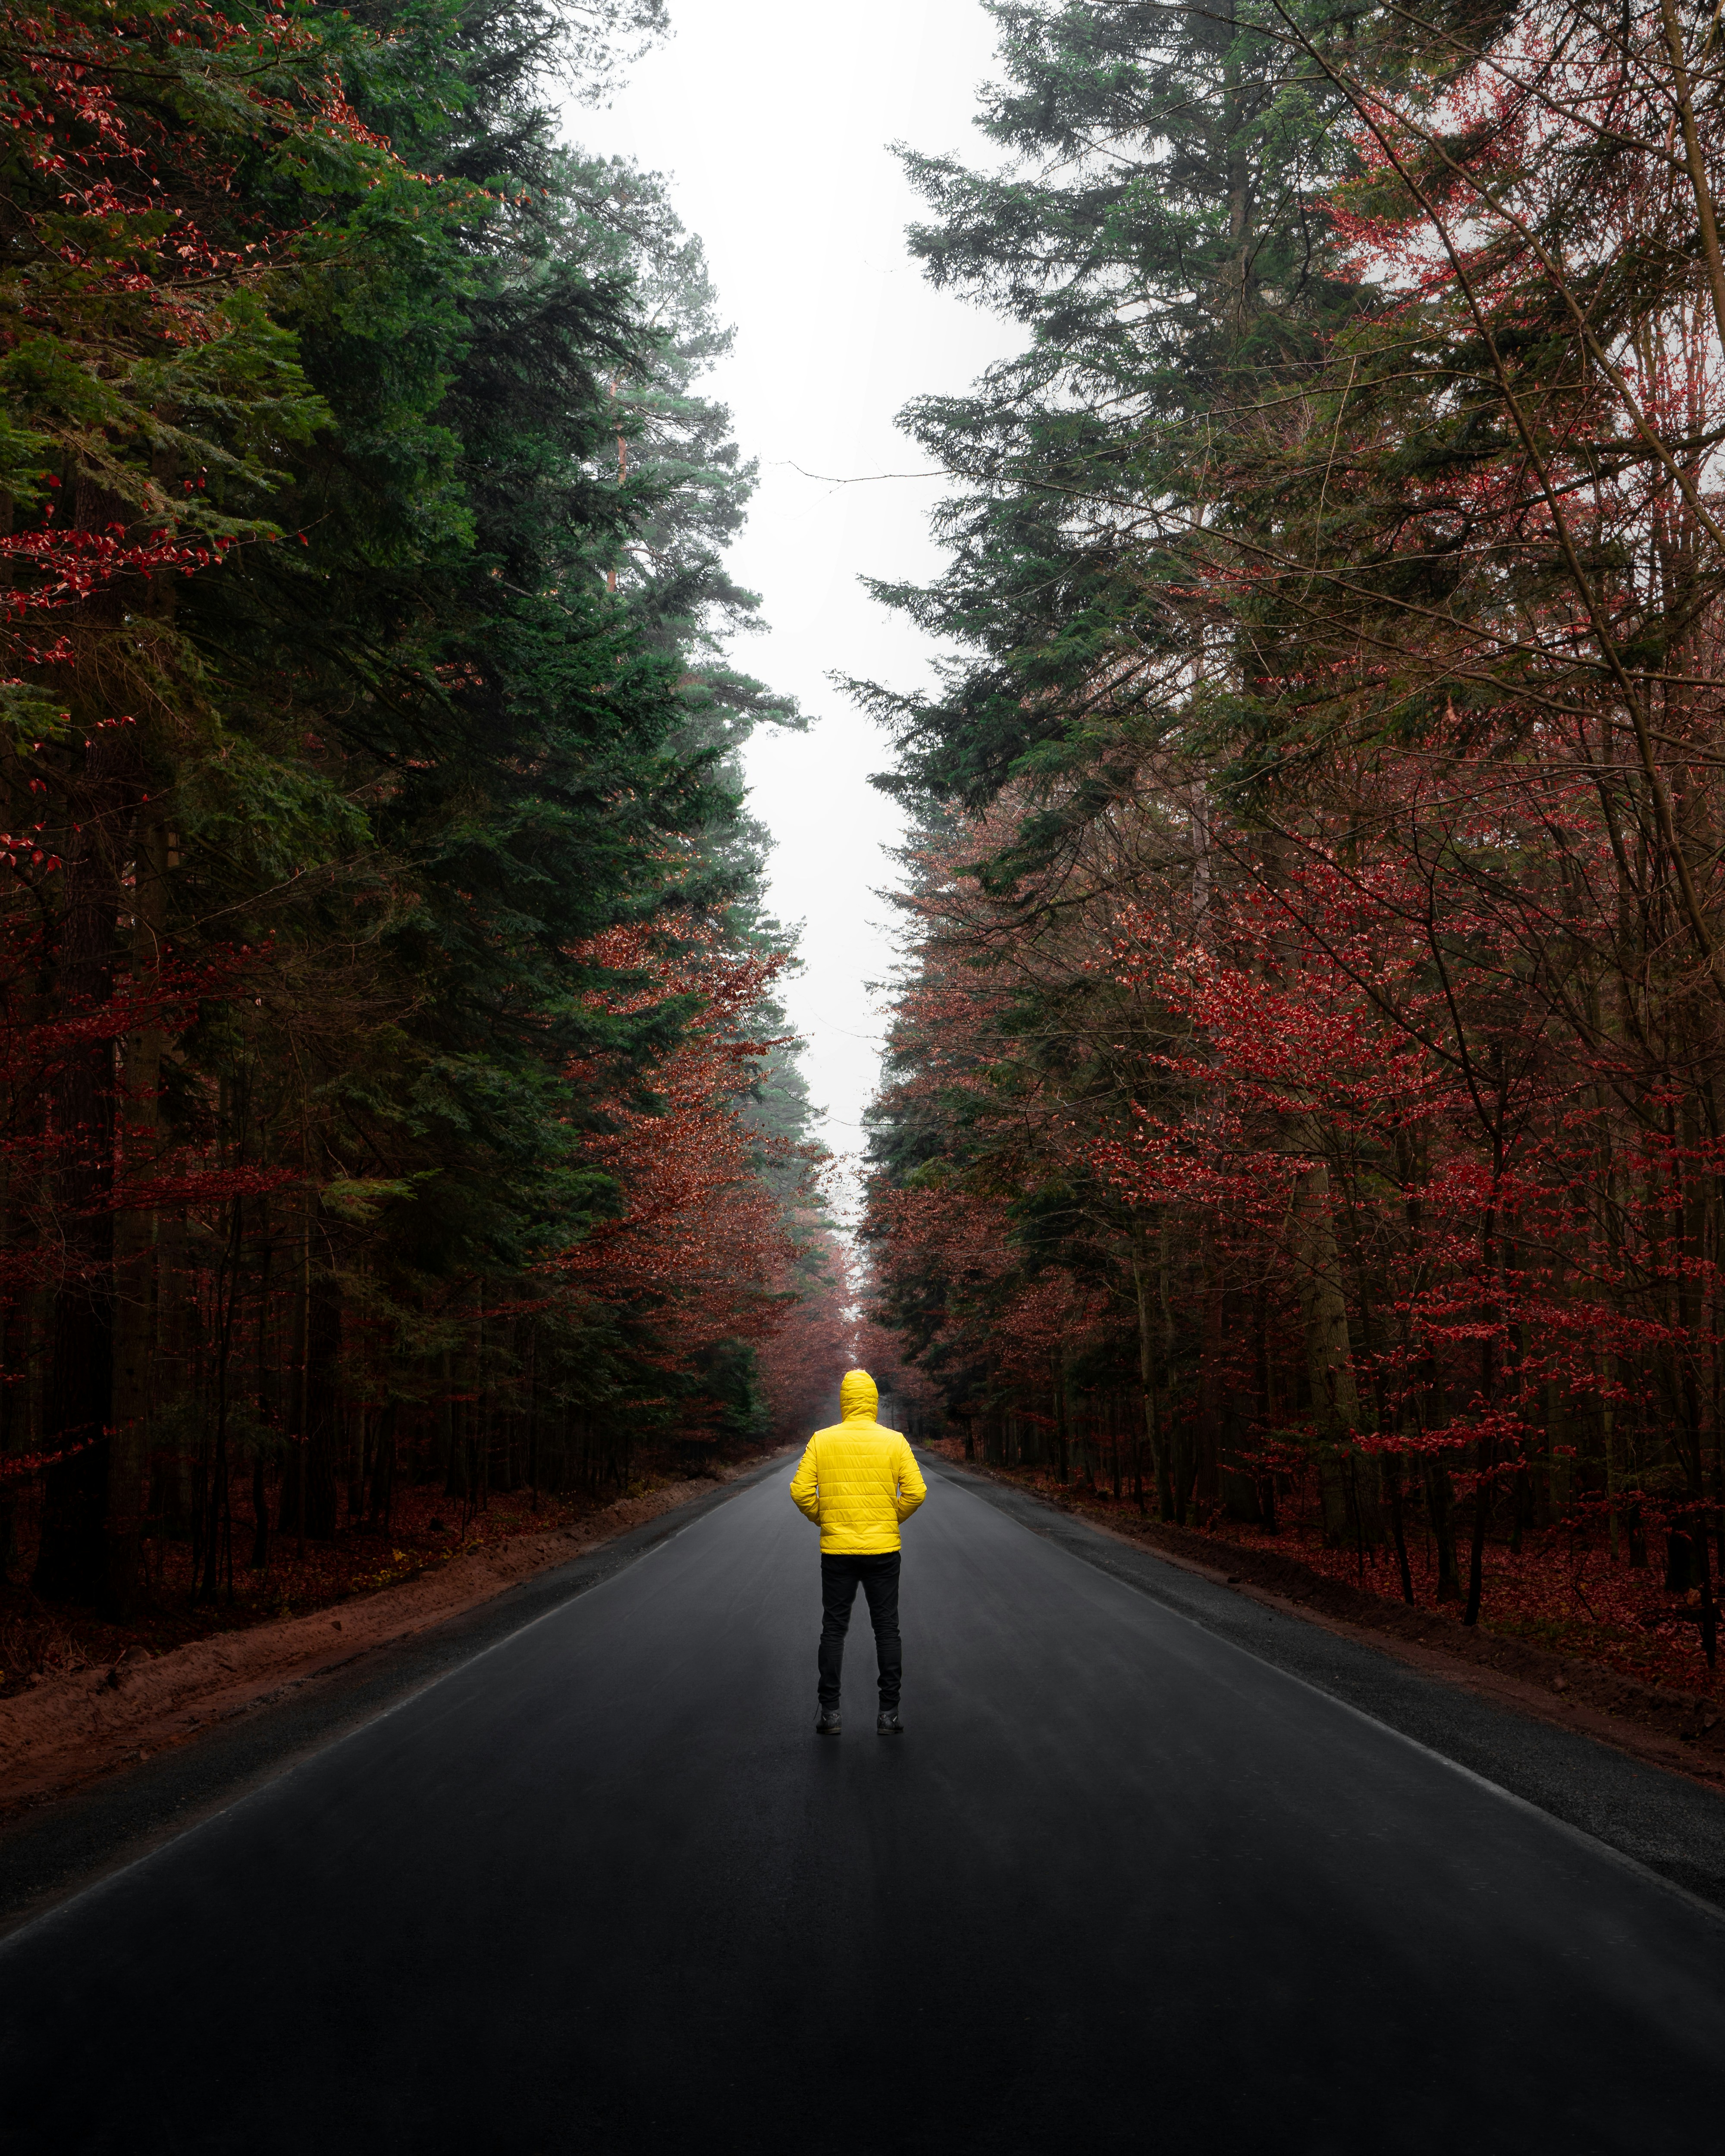 a man in a bright yellow slicker jacket stands in a wet road, on both sides tall pine trees reach to the sky